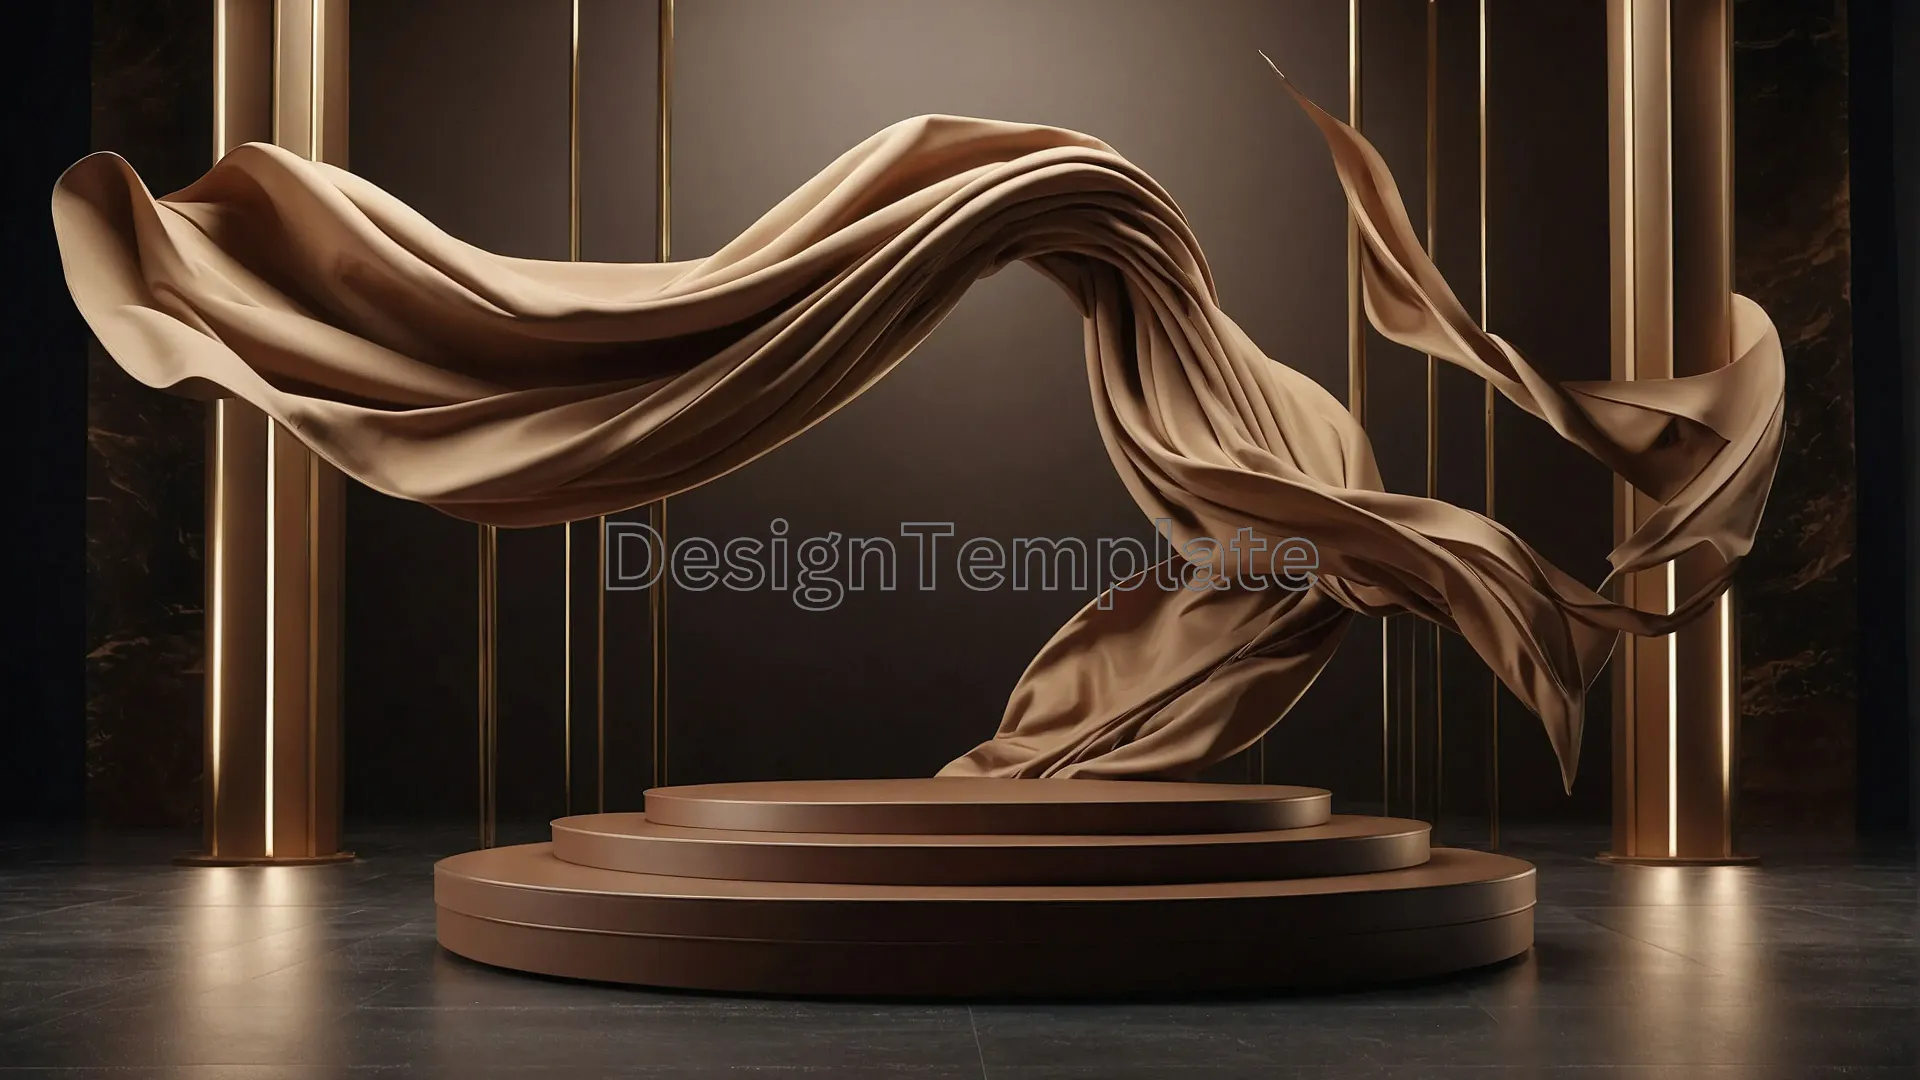 Luxurious Podium with Flowing Cloth Image